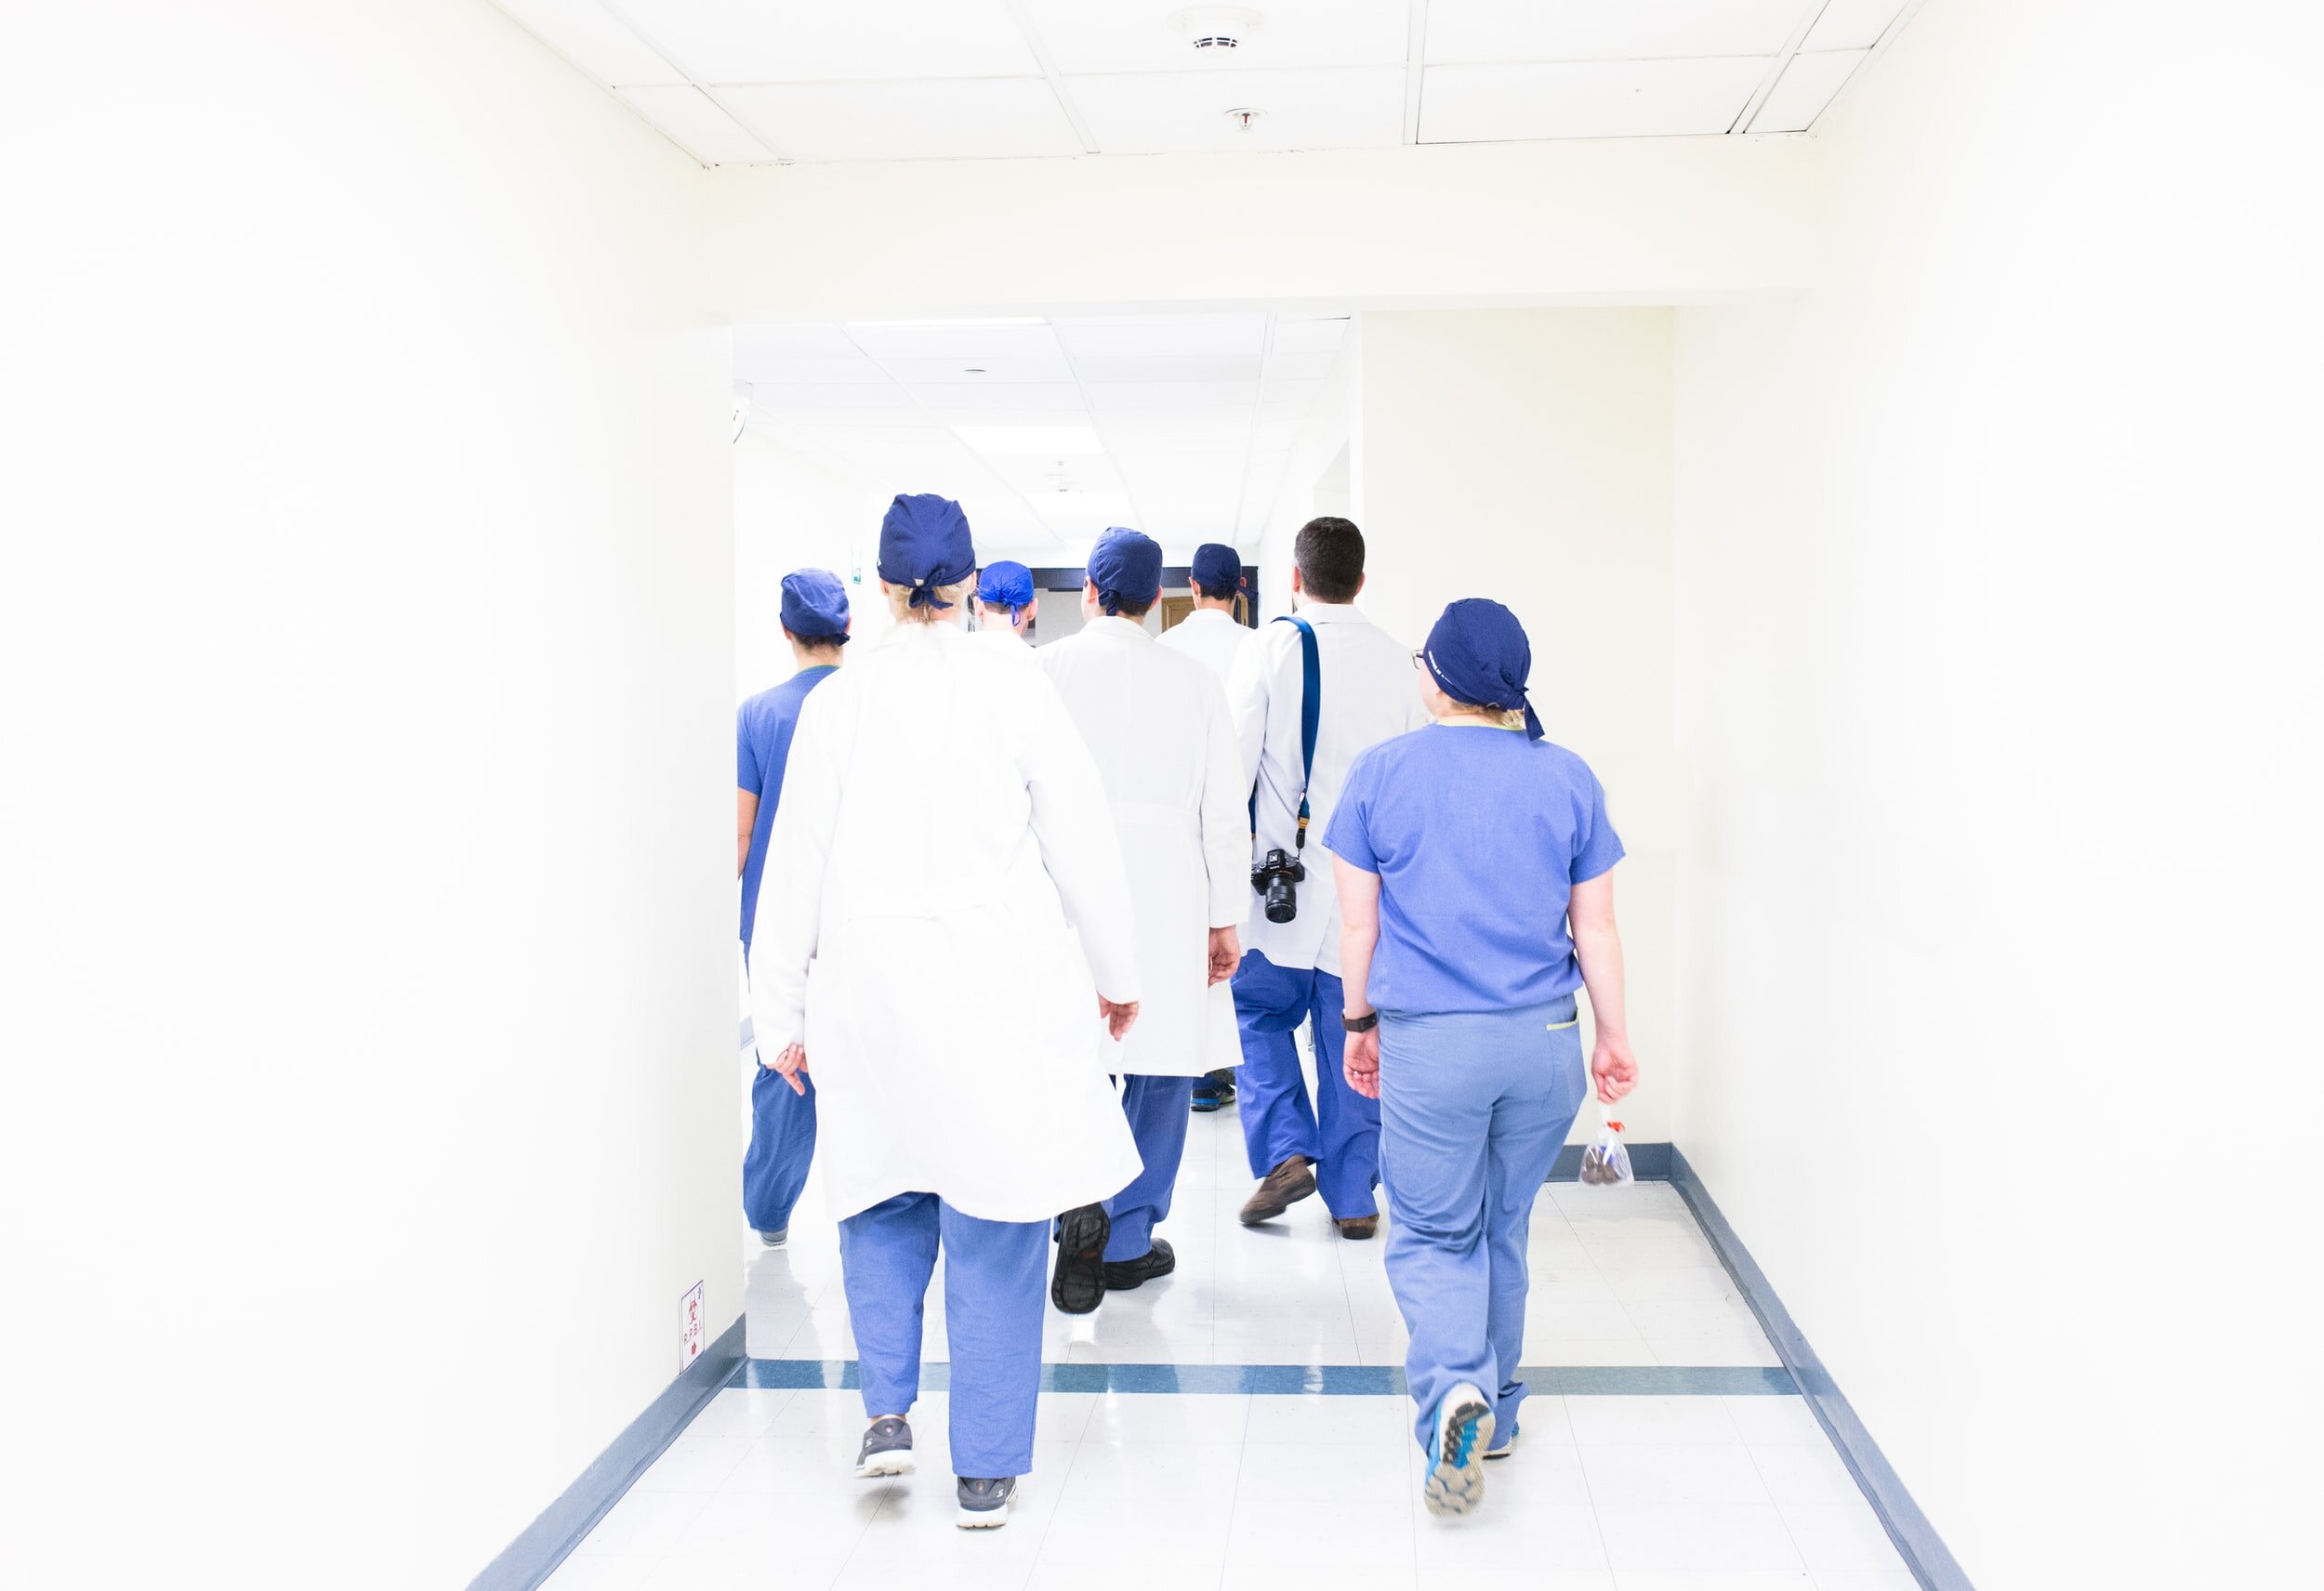 Picture of medical staff walking down a hallway.Photo by Luis Melendez on Unspalsh